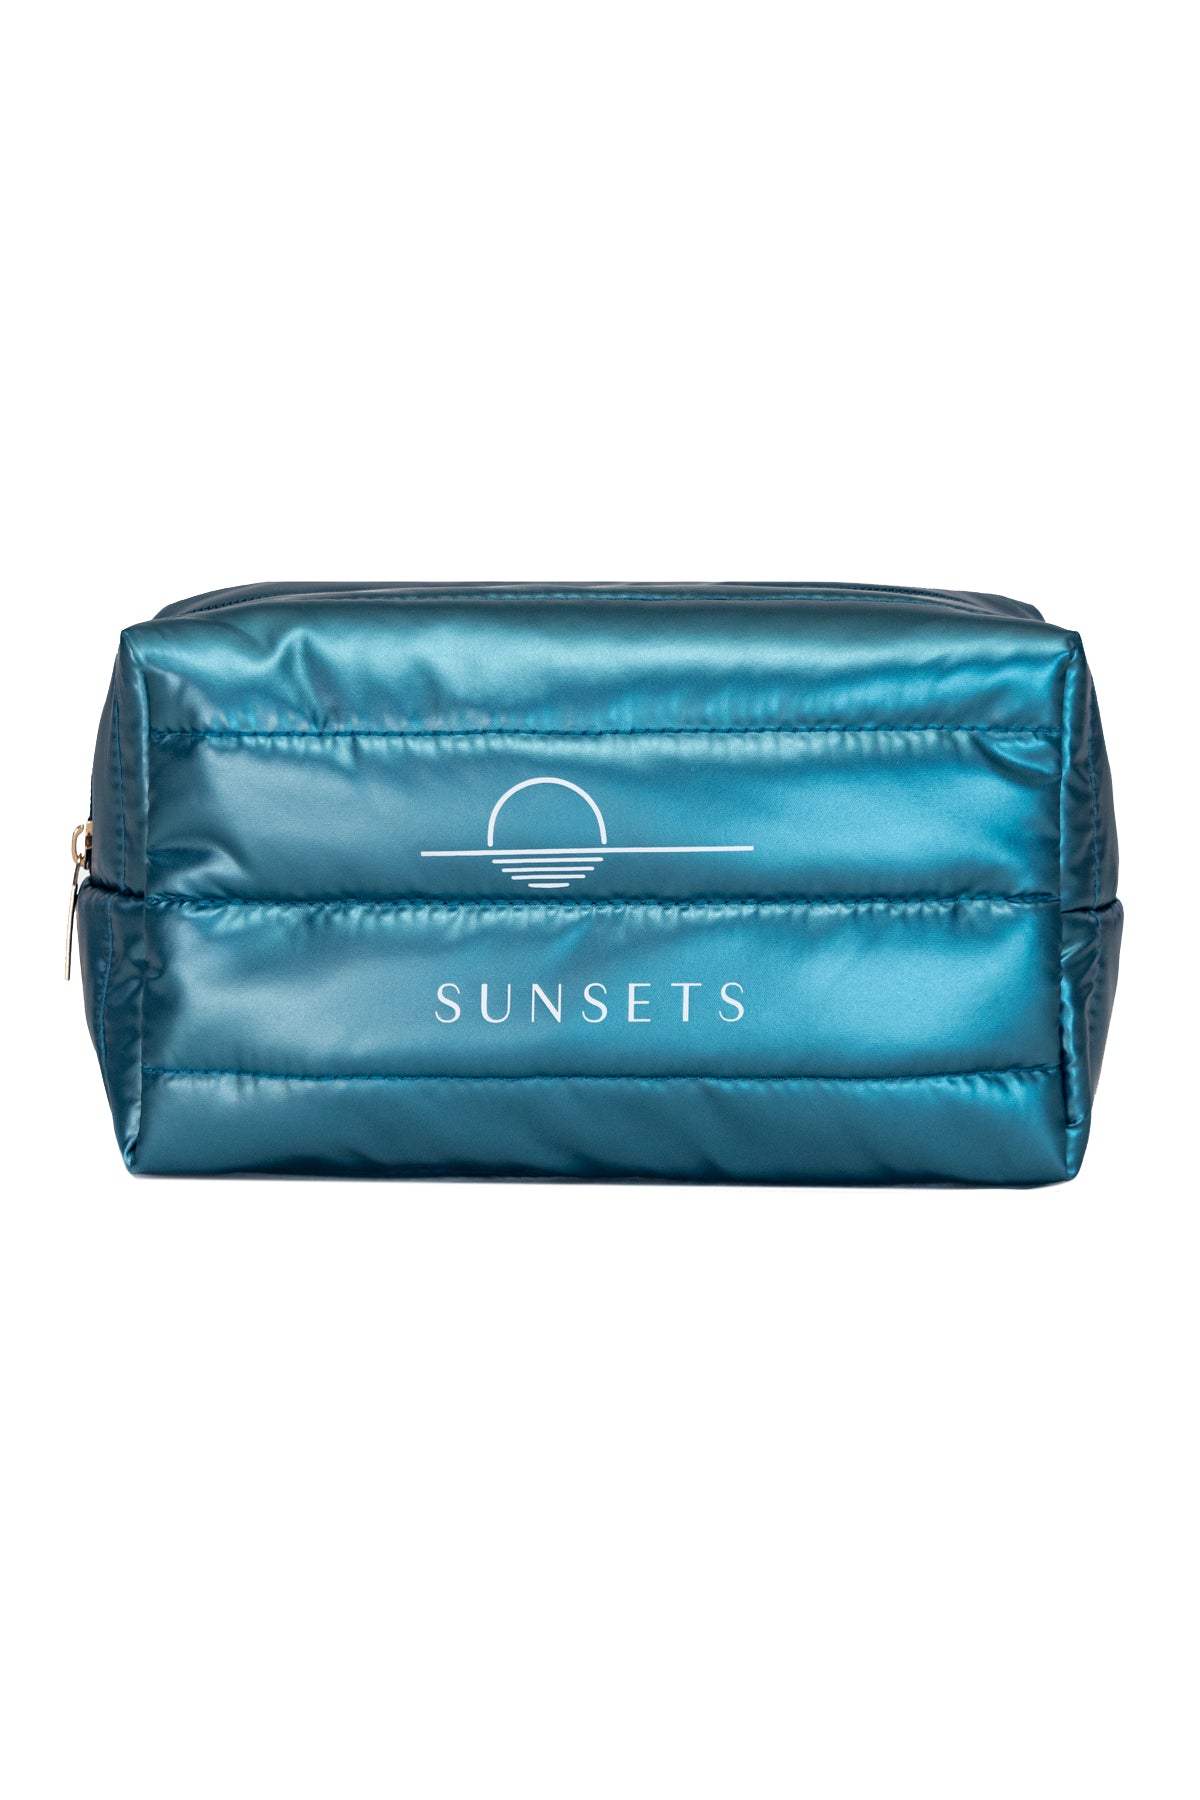 FREE Sunsets Travel Bag with $150 Purchase